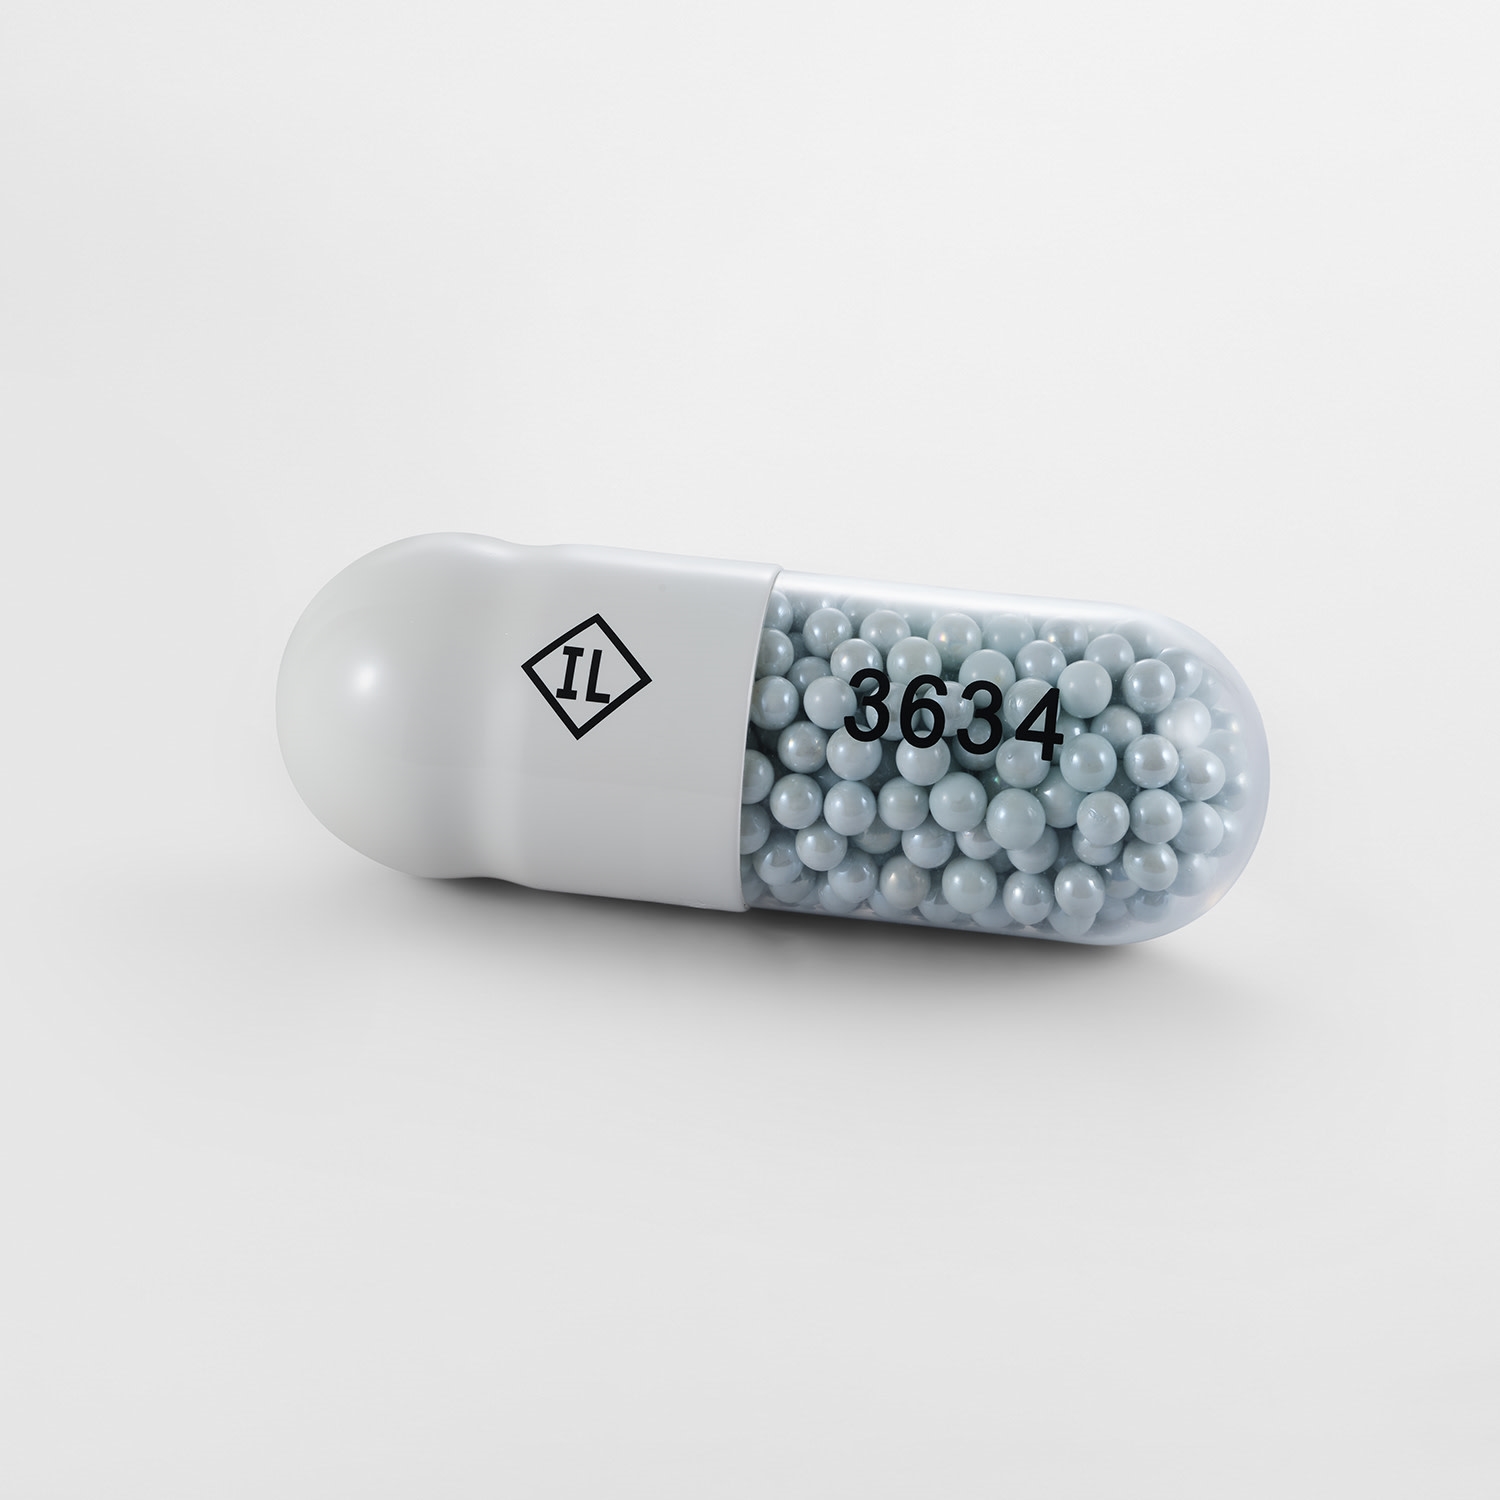 Theophylline Extended Release IL 3634 - Damien Hirst